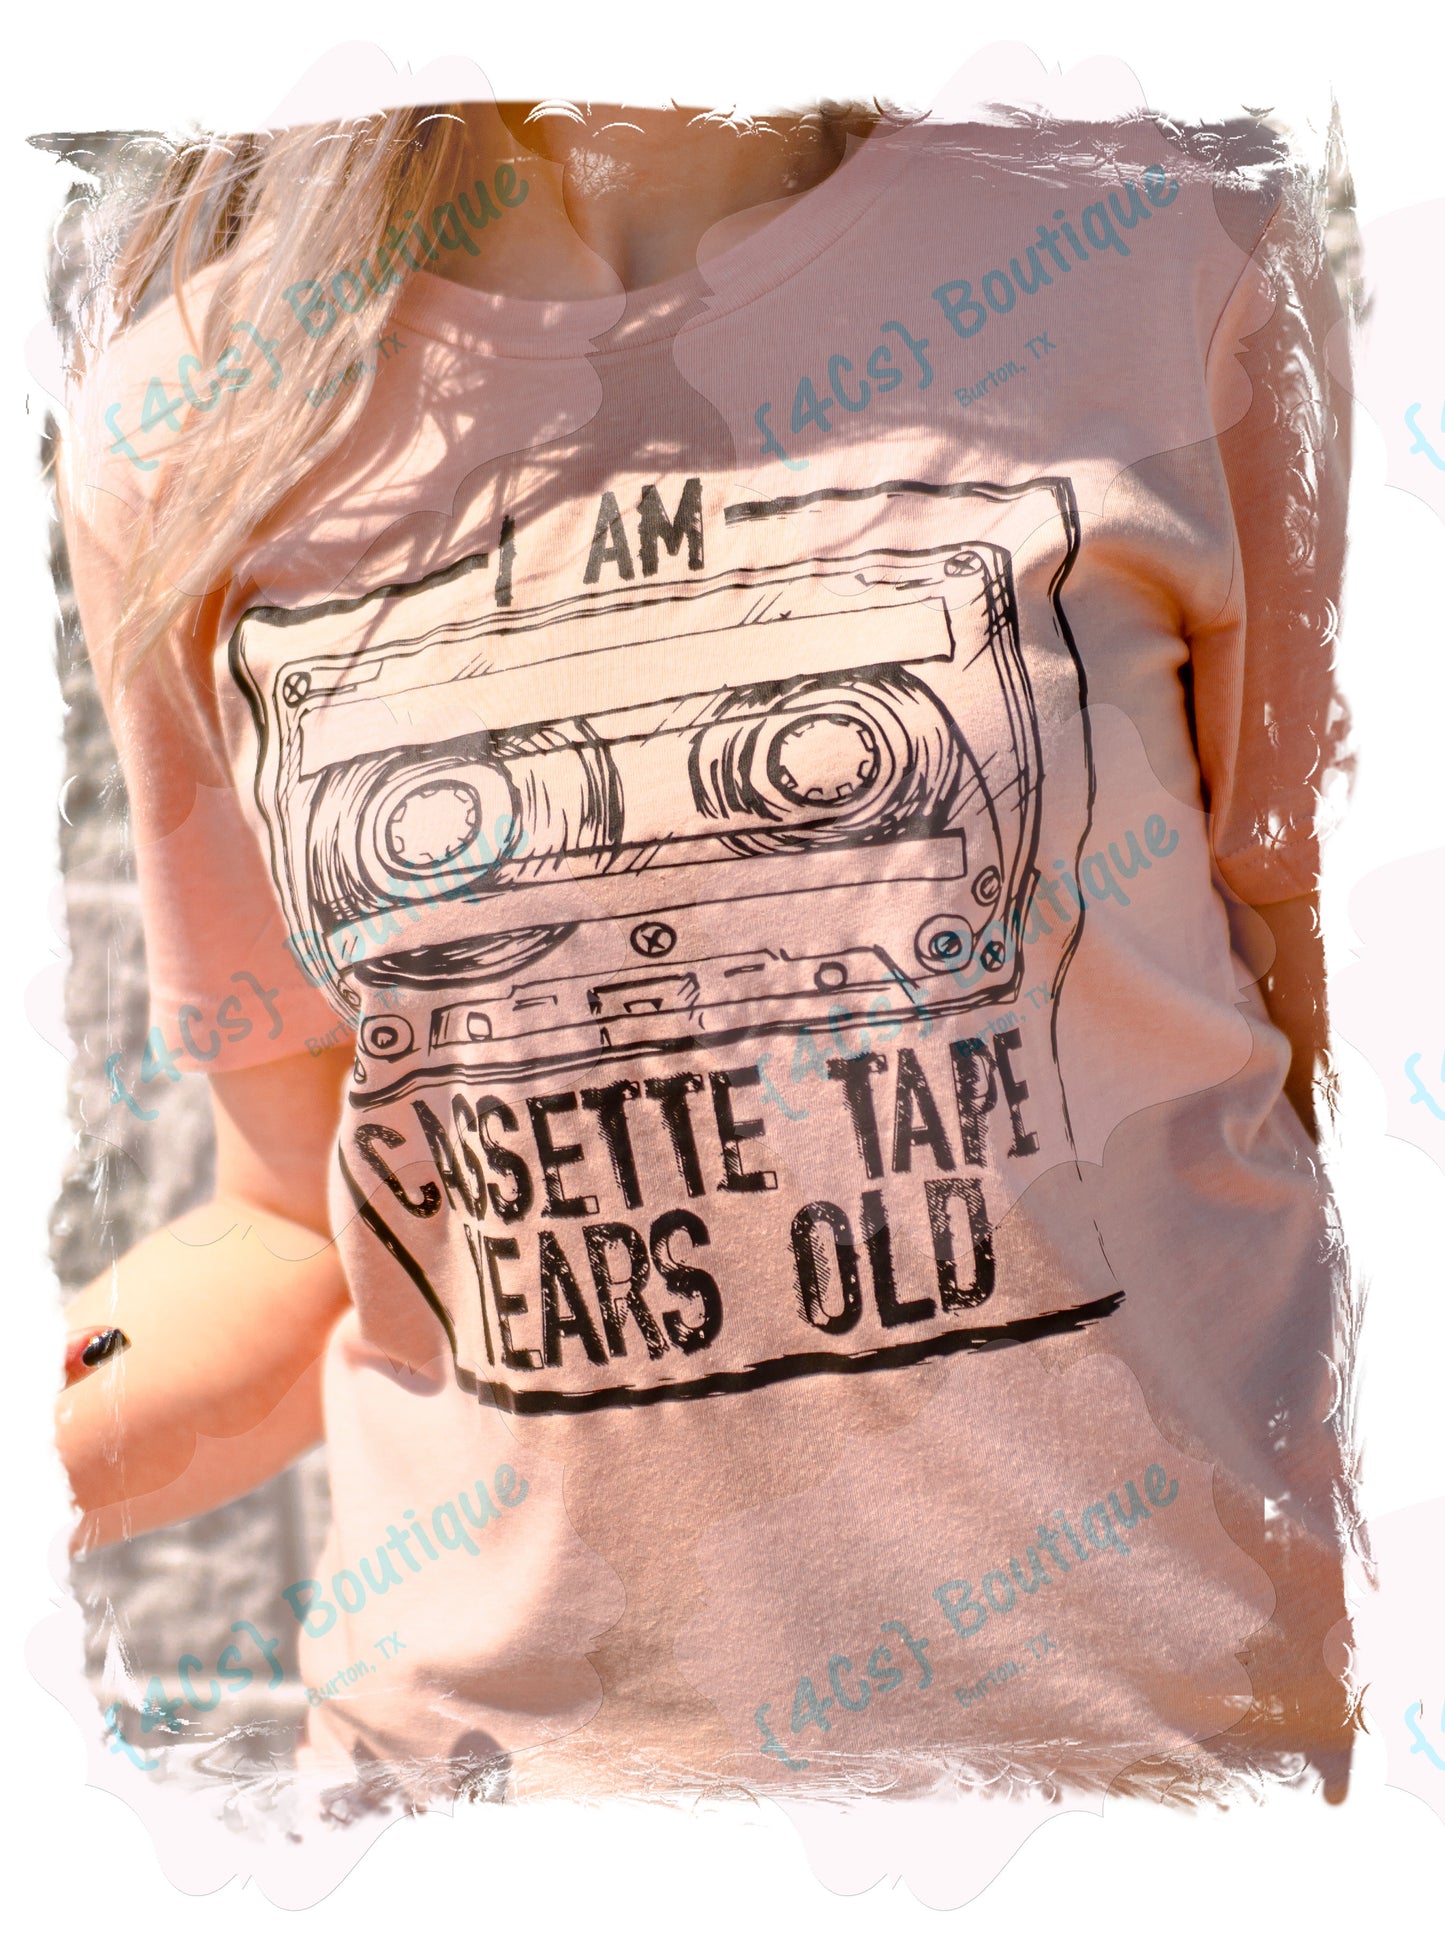 I Am Cassette Tape Years Old Shirt